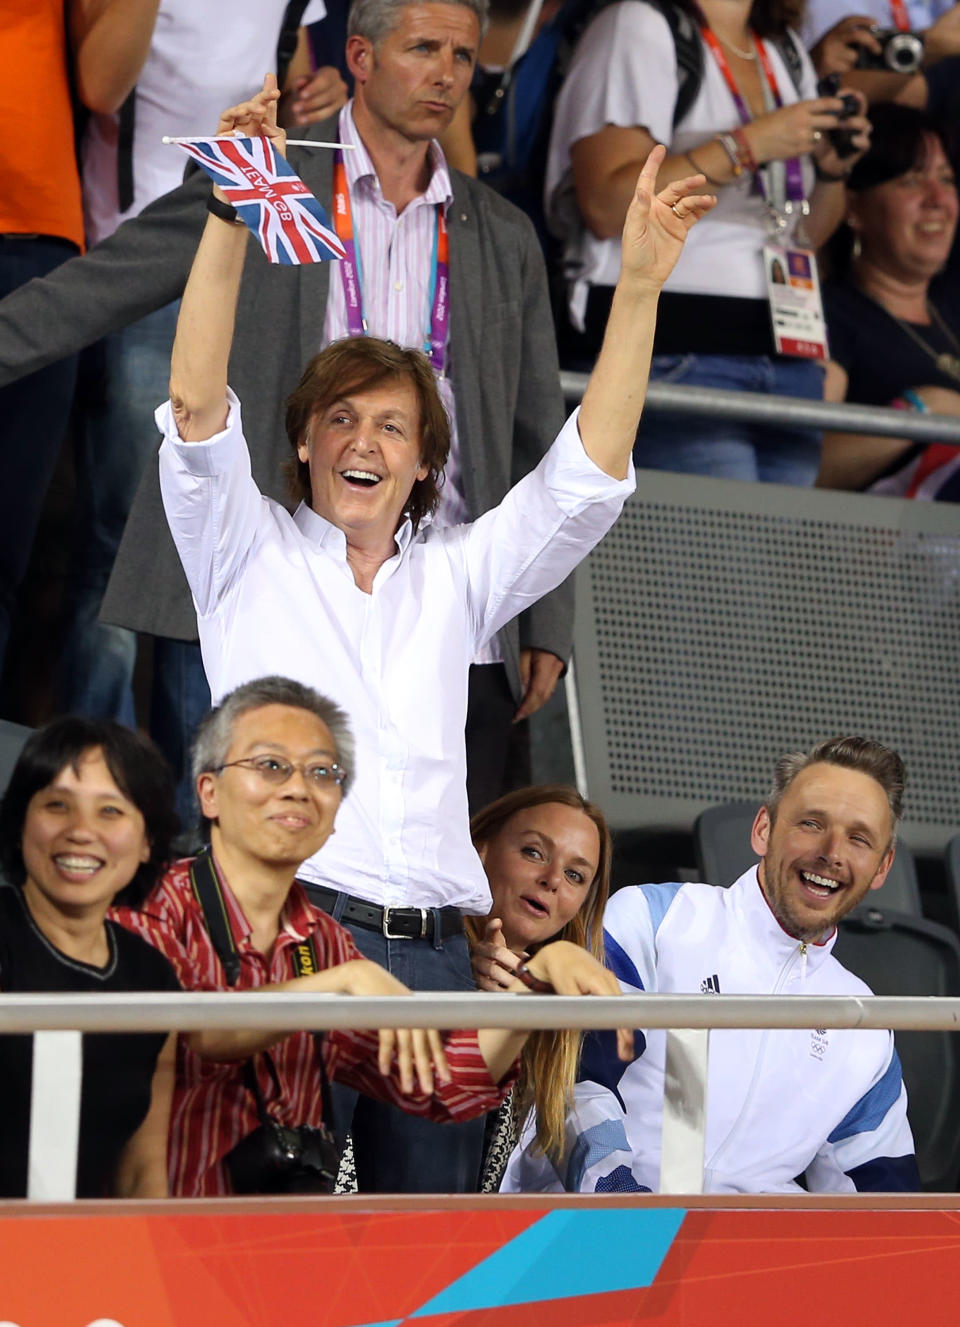 Sir Paul McCartney, Stella McCartney and Alasdhair Willis attend the Women's Team Pursuit Track Cycling Finals on Day 8 of the London 2012 Olympic Games at Velodrome on August 4, 2012 in London, England. (Photo by Quinn Rooney/Getty Images)